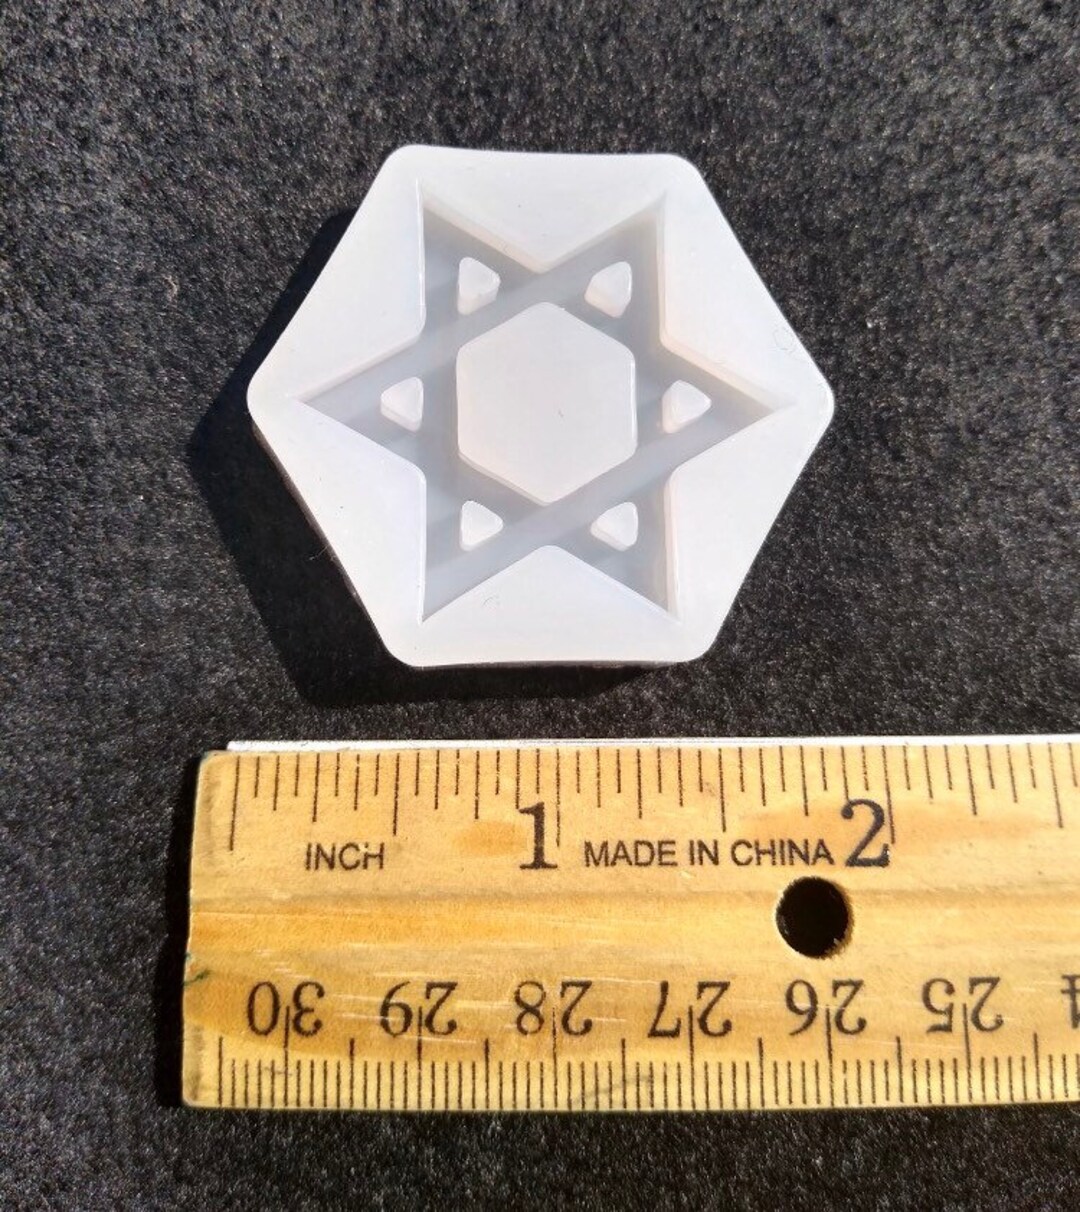 The Kosher Cook Star of David Shaped Silicone Molds for Baking